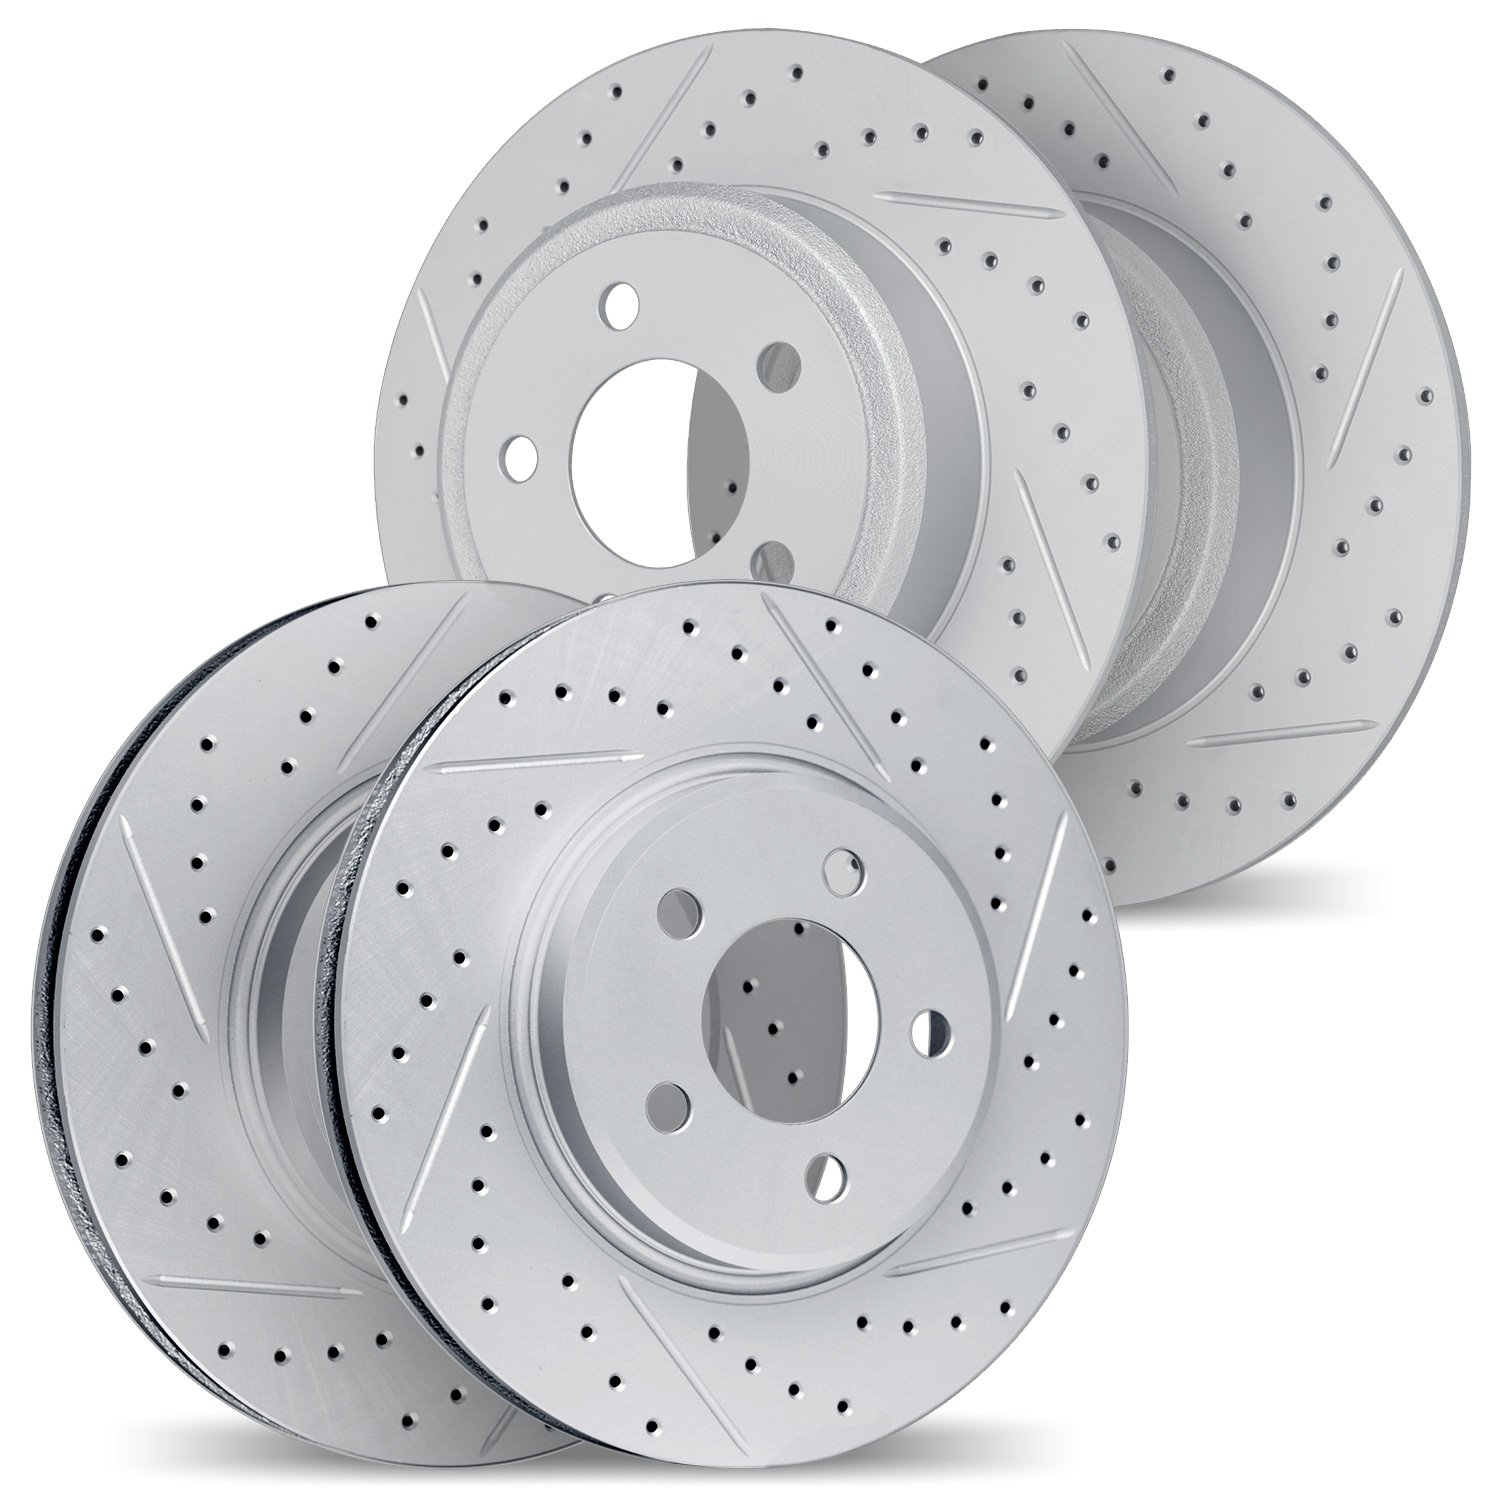 2004-03015 Geoperformance Drilled/Slotted Brake Rotors, 2007-2010 Kia/Hyundai/Genesis, Position: Front and Rear